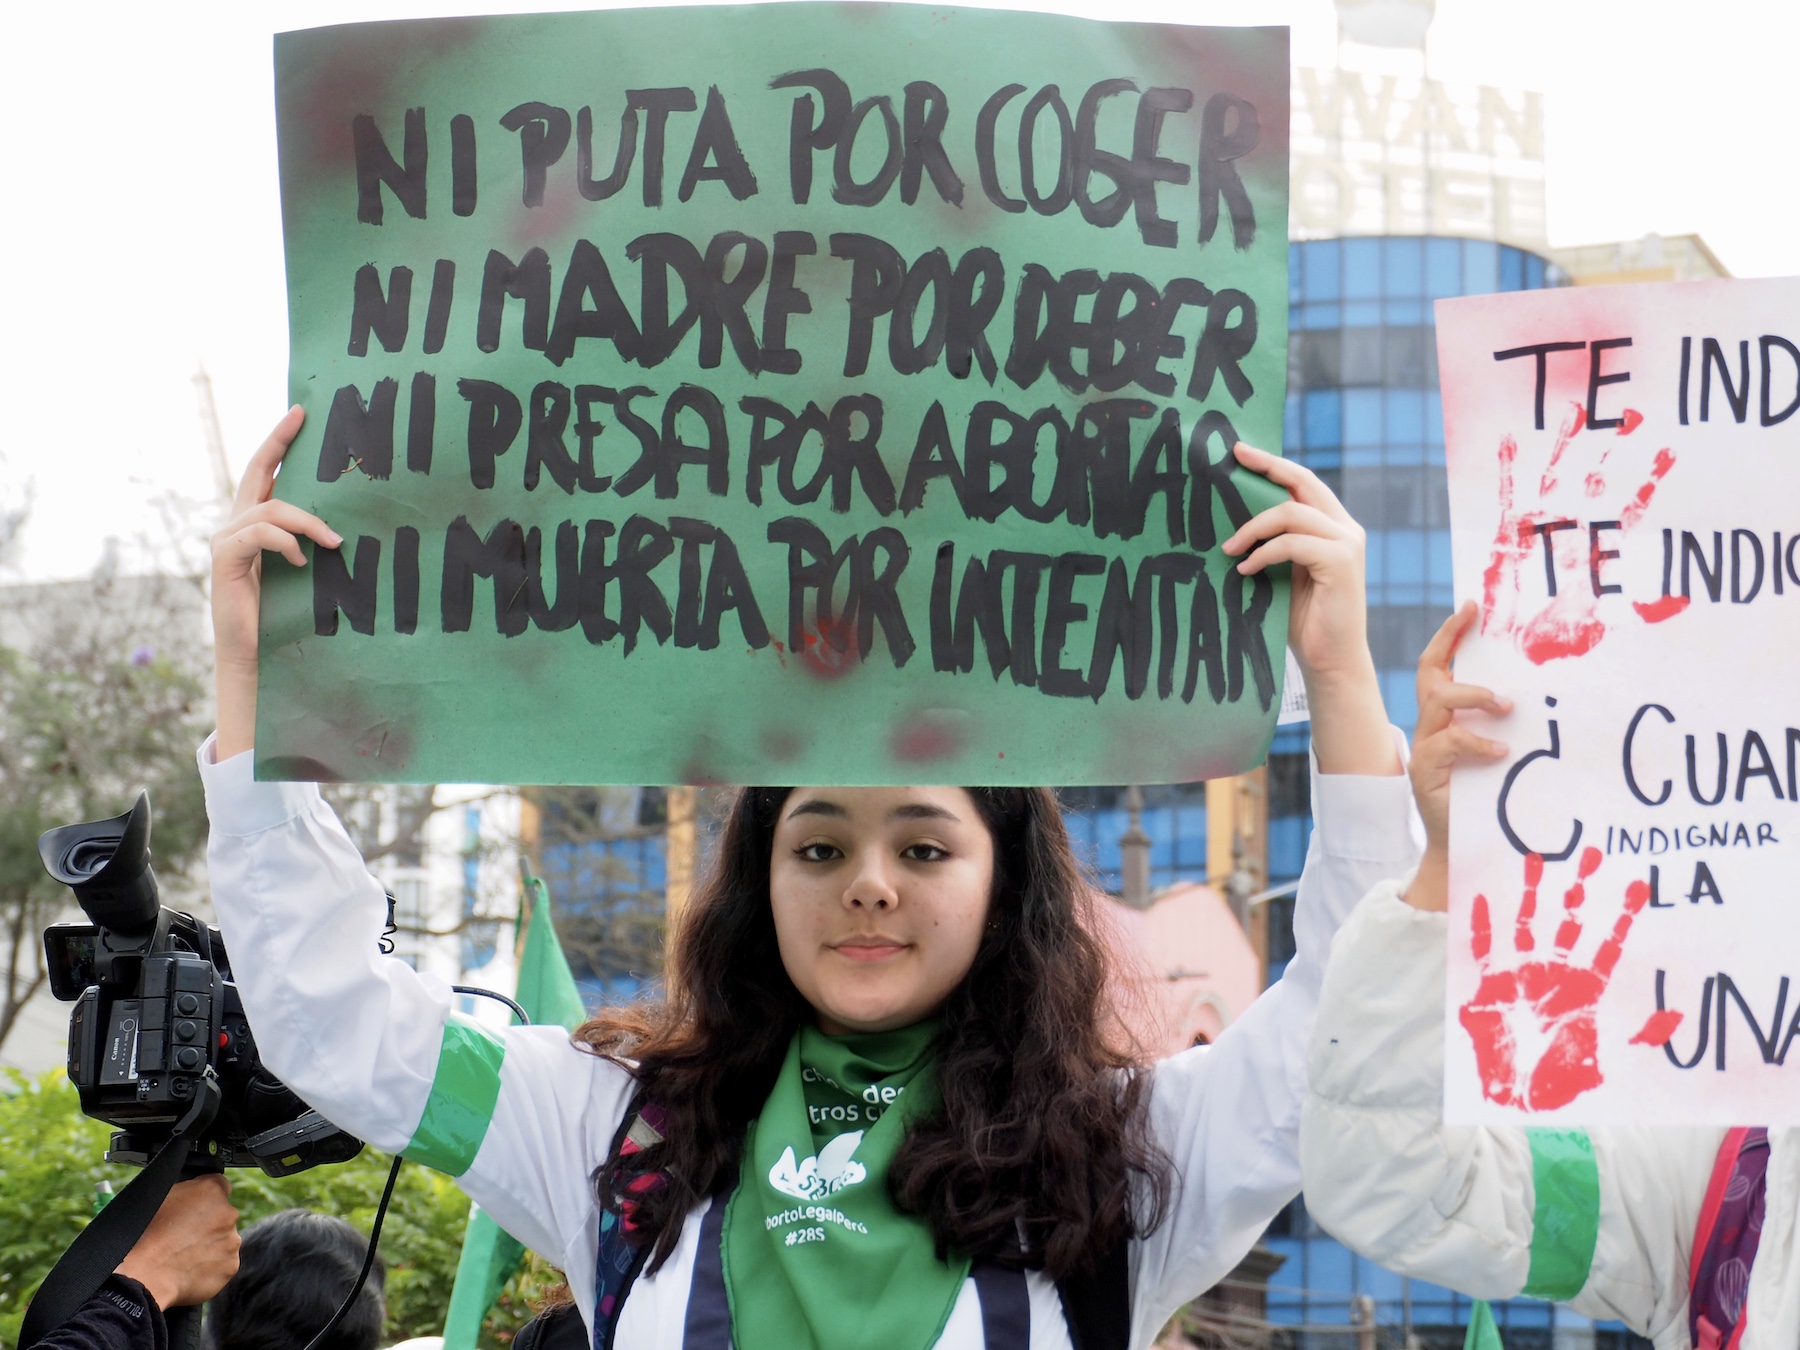 Women In Latin America Took To The Streets To Protest For The Right To Safe And Legal Abortions